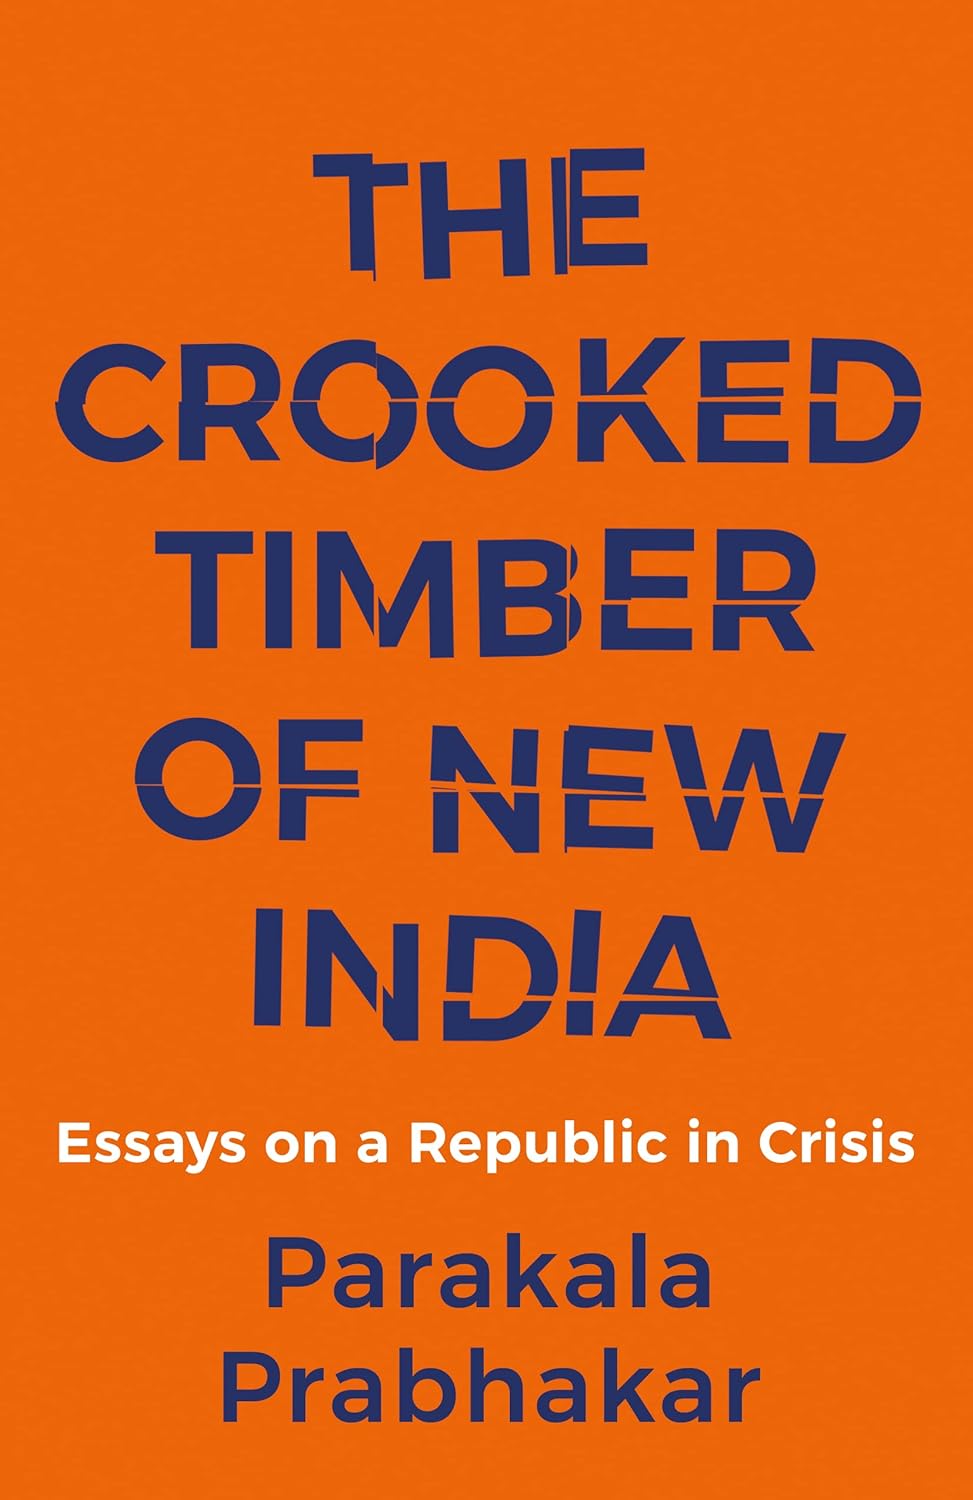 THE CROOKED TIMBER OF NEW INDIA